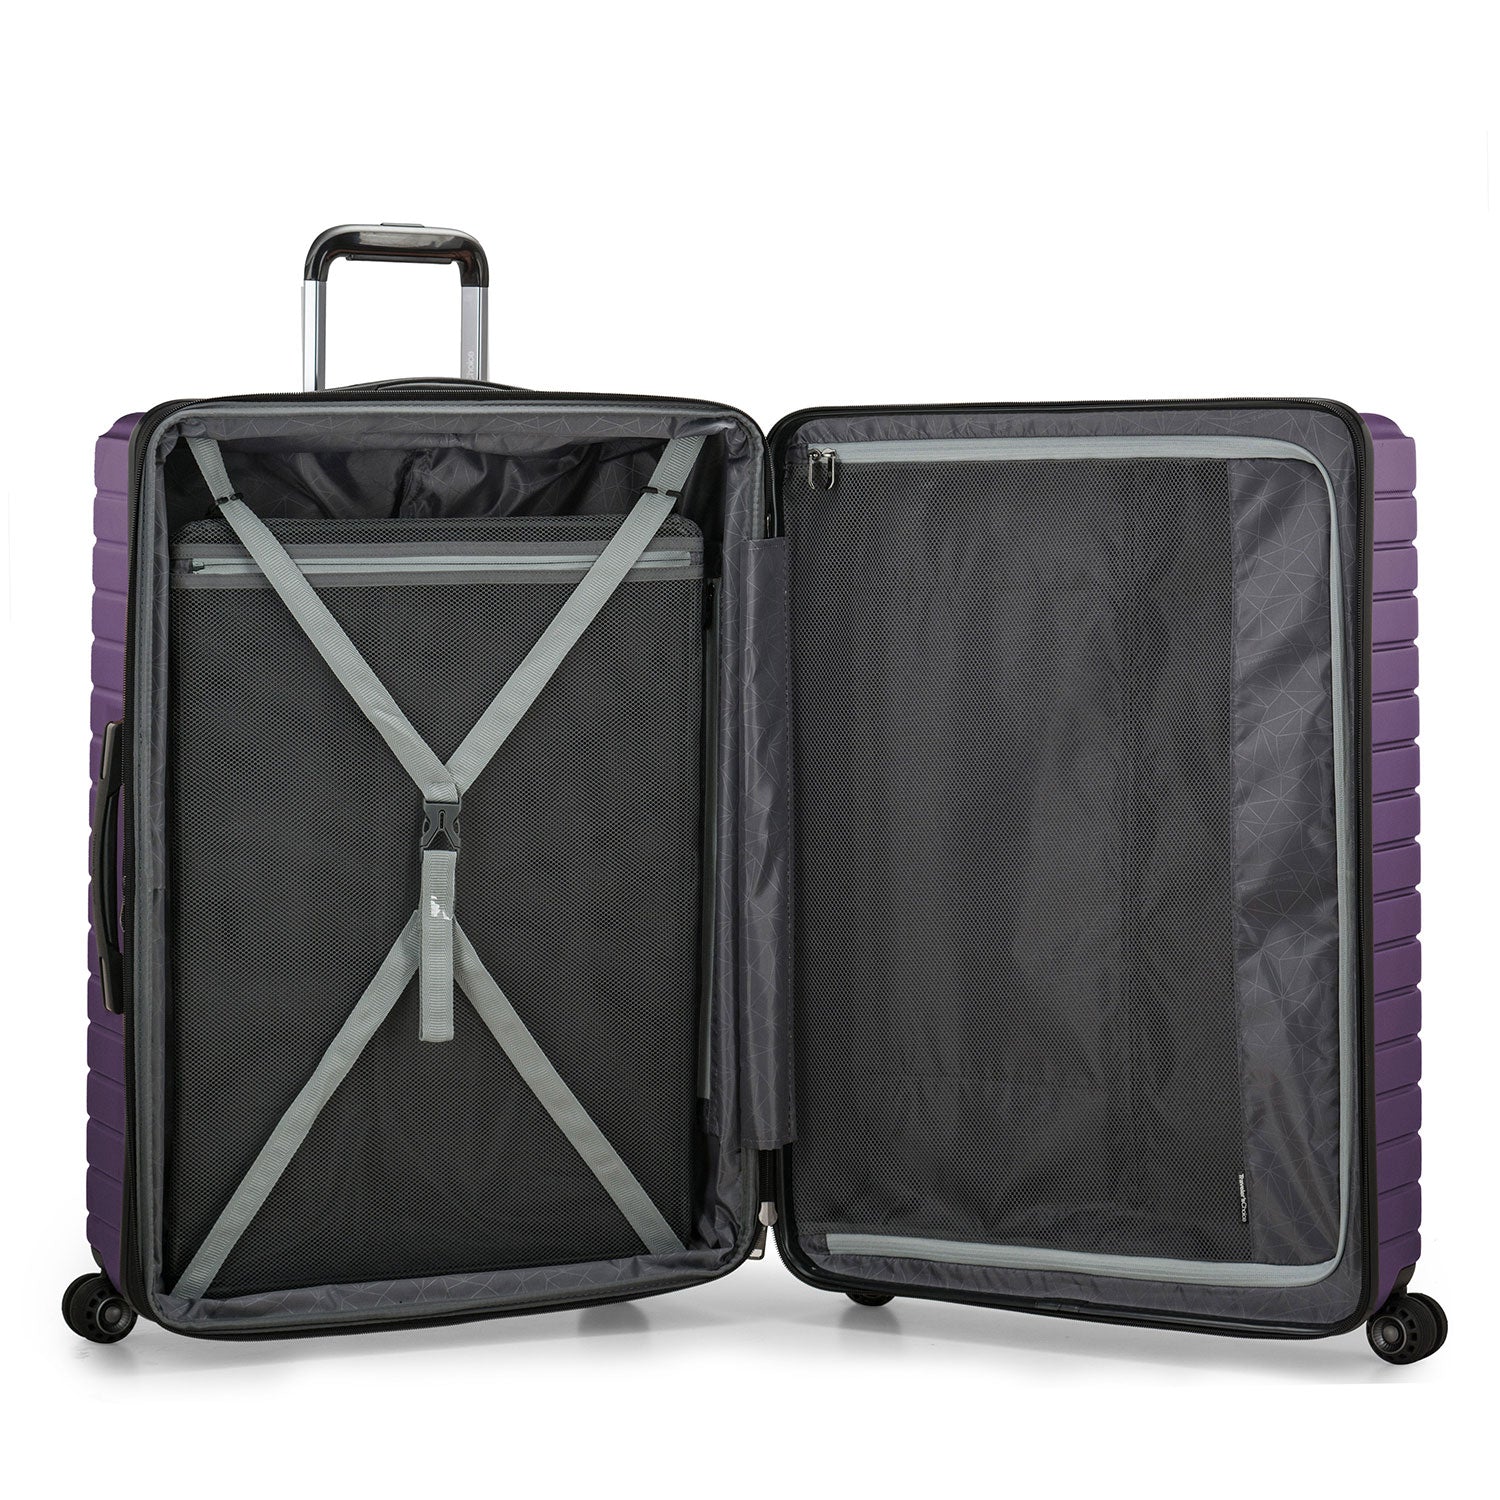 An image of Archer Large Checked Luggage Suitcase Piece with 4 Spinner Wheels